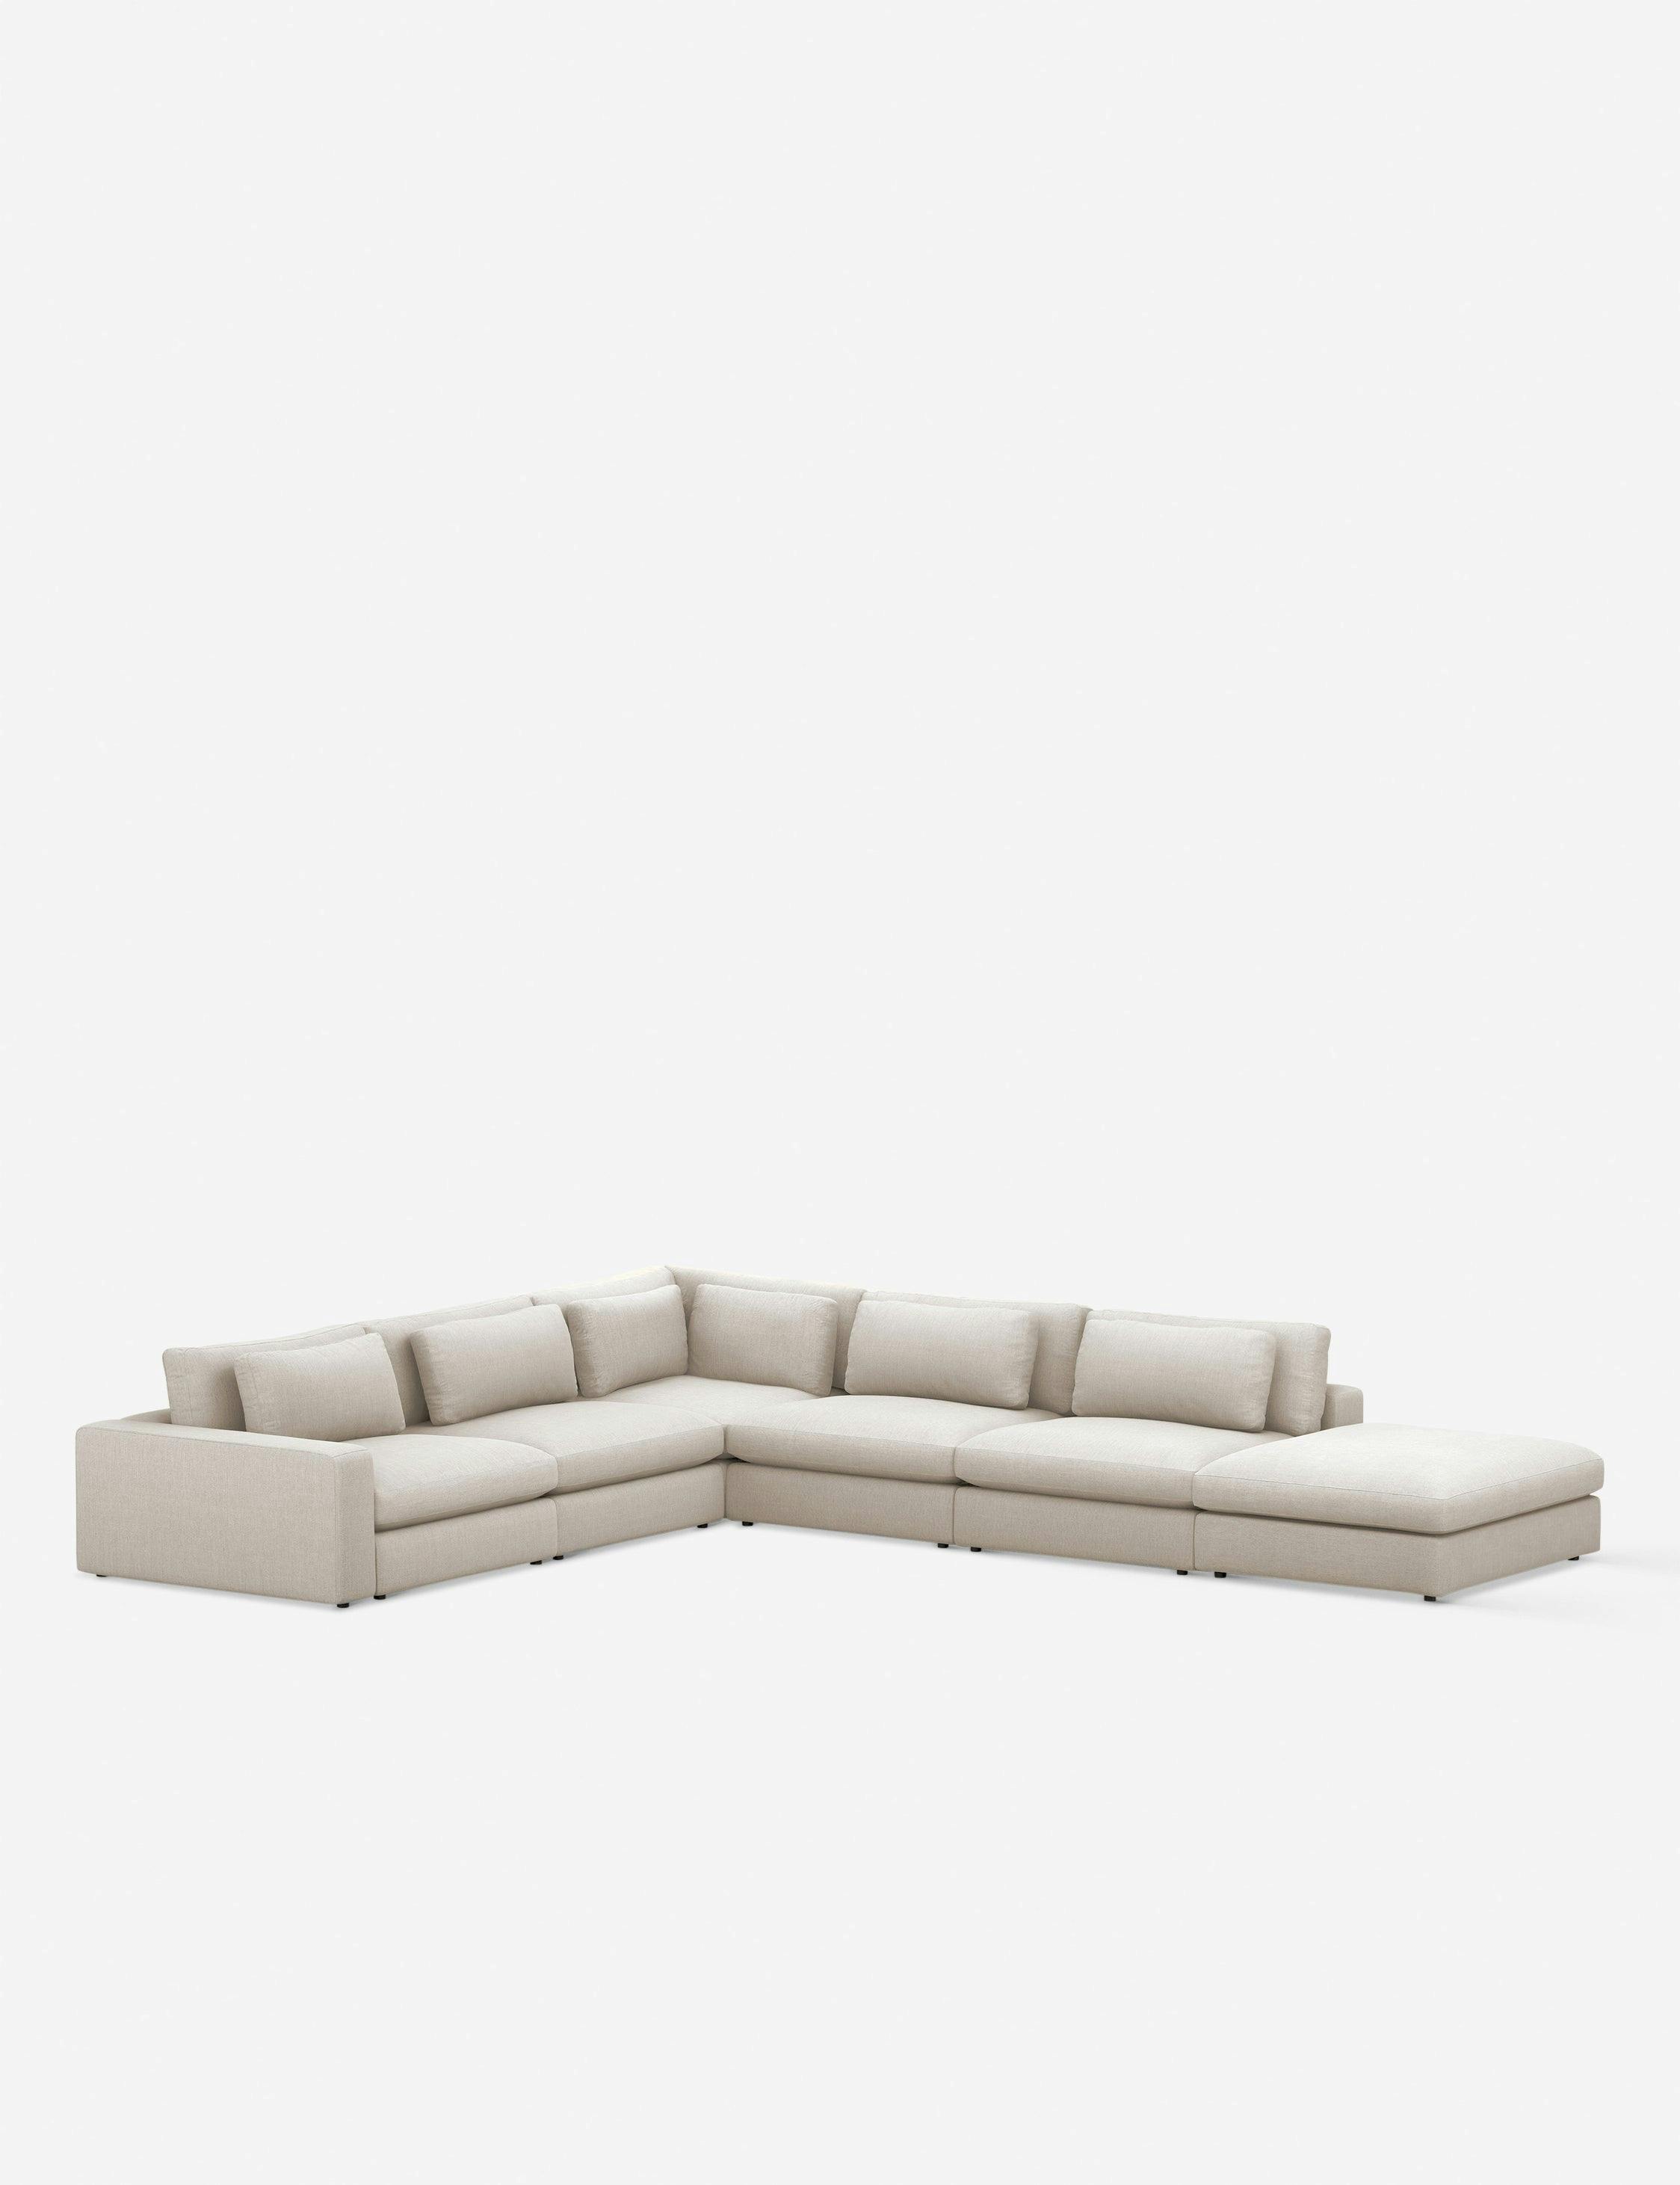 Cresswell Essence Natural 5-Piece Corner Sectional Sofa with Ottoman